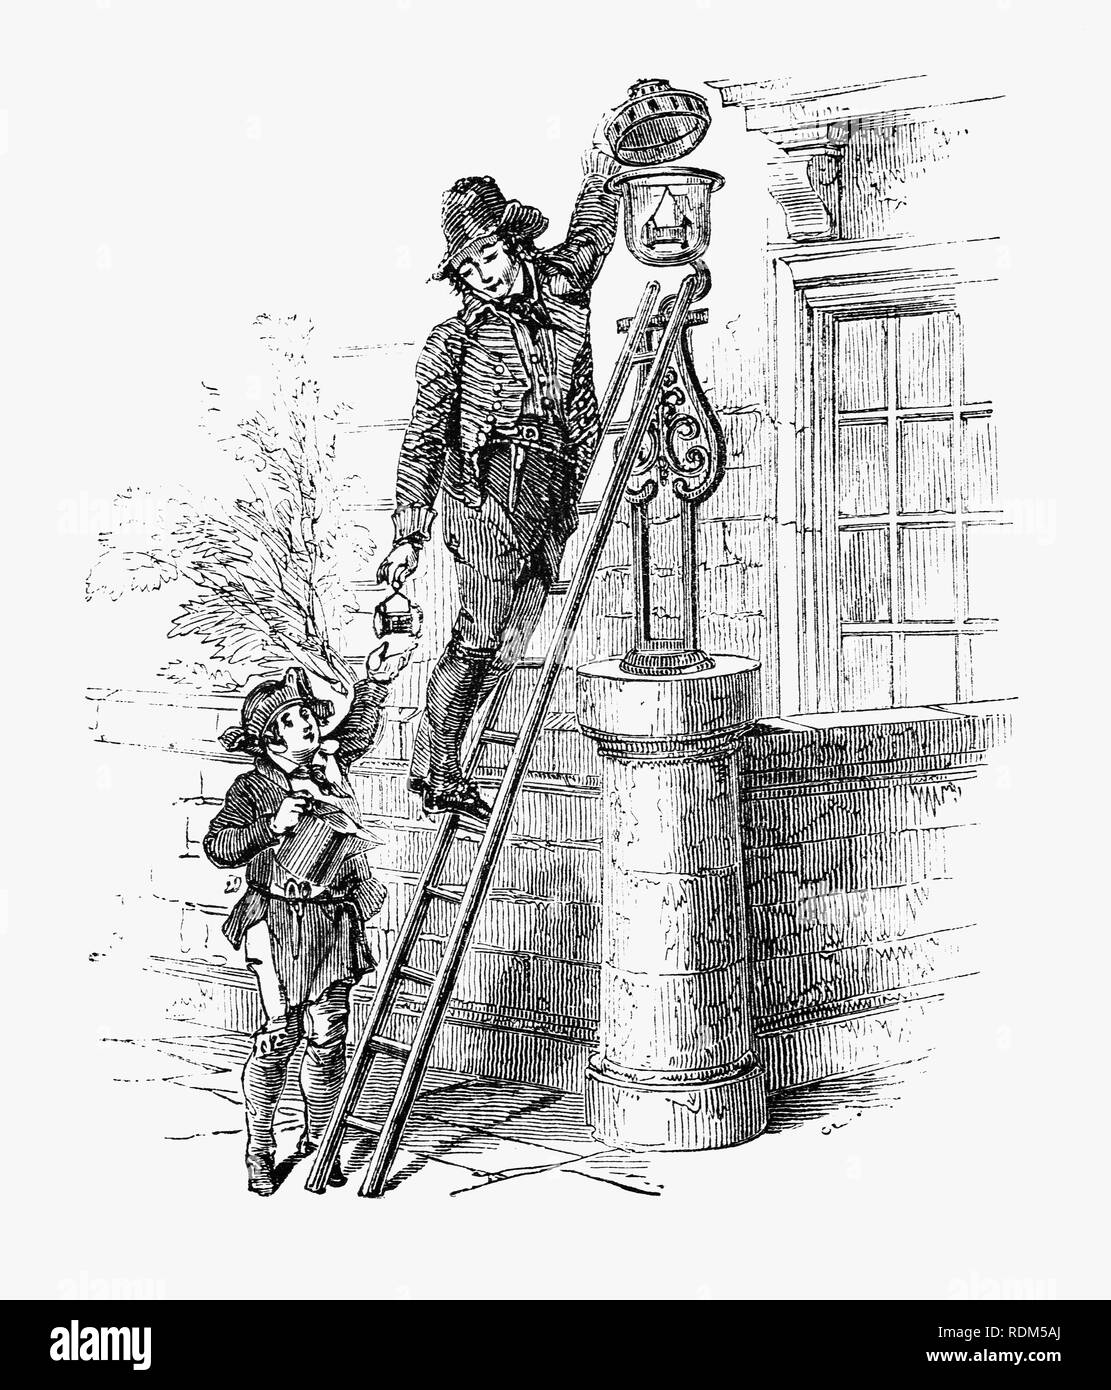 An 18th Century lamplighter and his assistant in London, England. Employed to light and maintain the oil burning street lights lit each evening, In some communities, lamplighters served in a role akin to a town watchman; in others, it may have been seen as little more than a sinecure. By the 19th century however, gas lights became the dominant form of street lighting. Stock Photo